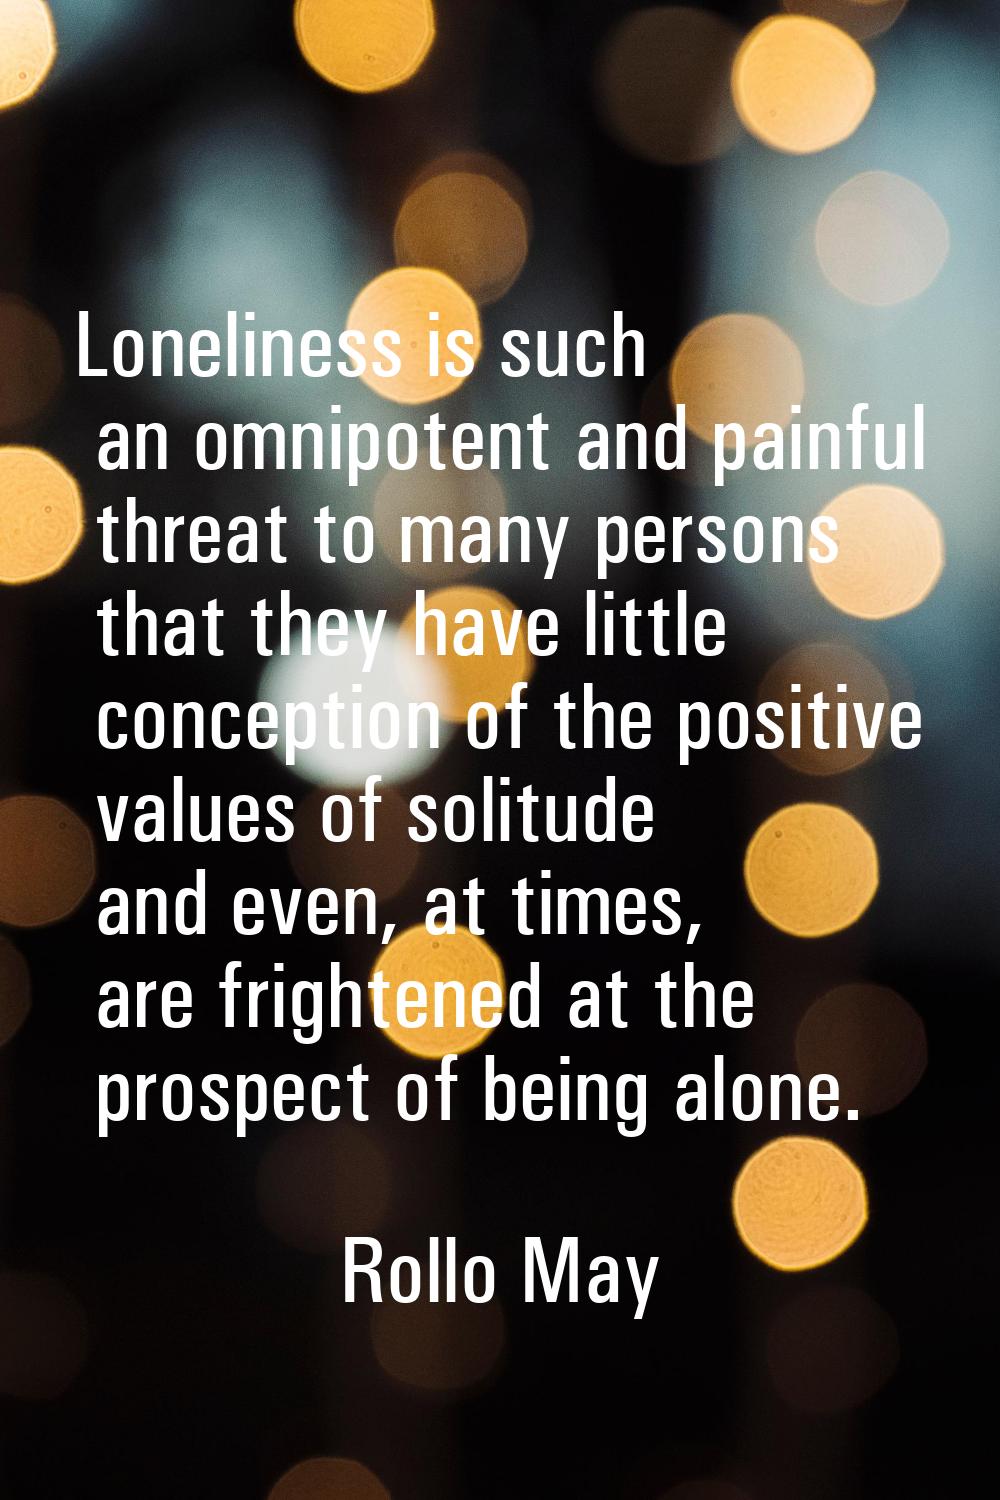 Loneliness is such an omnipotent and painful threat to many persons that they have little conceptio